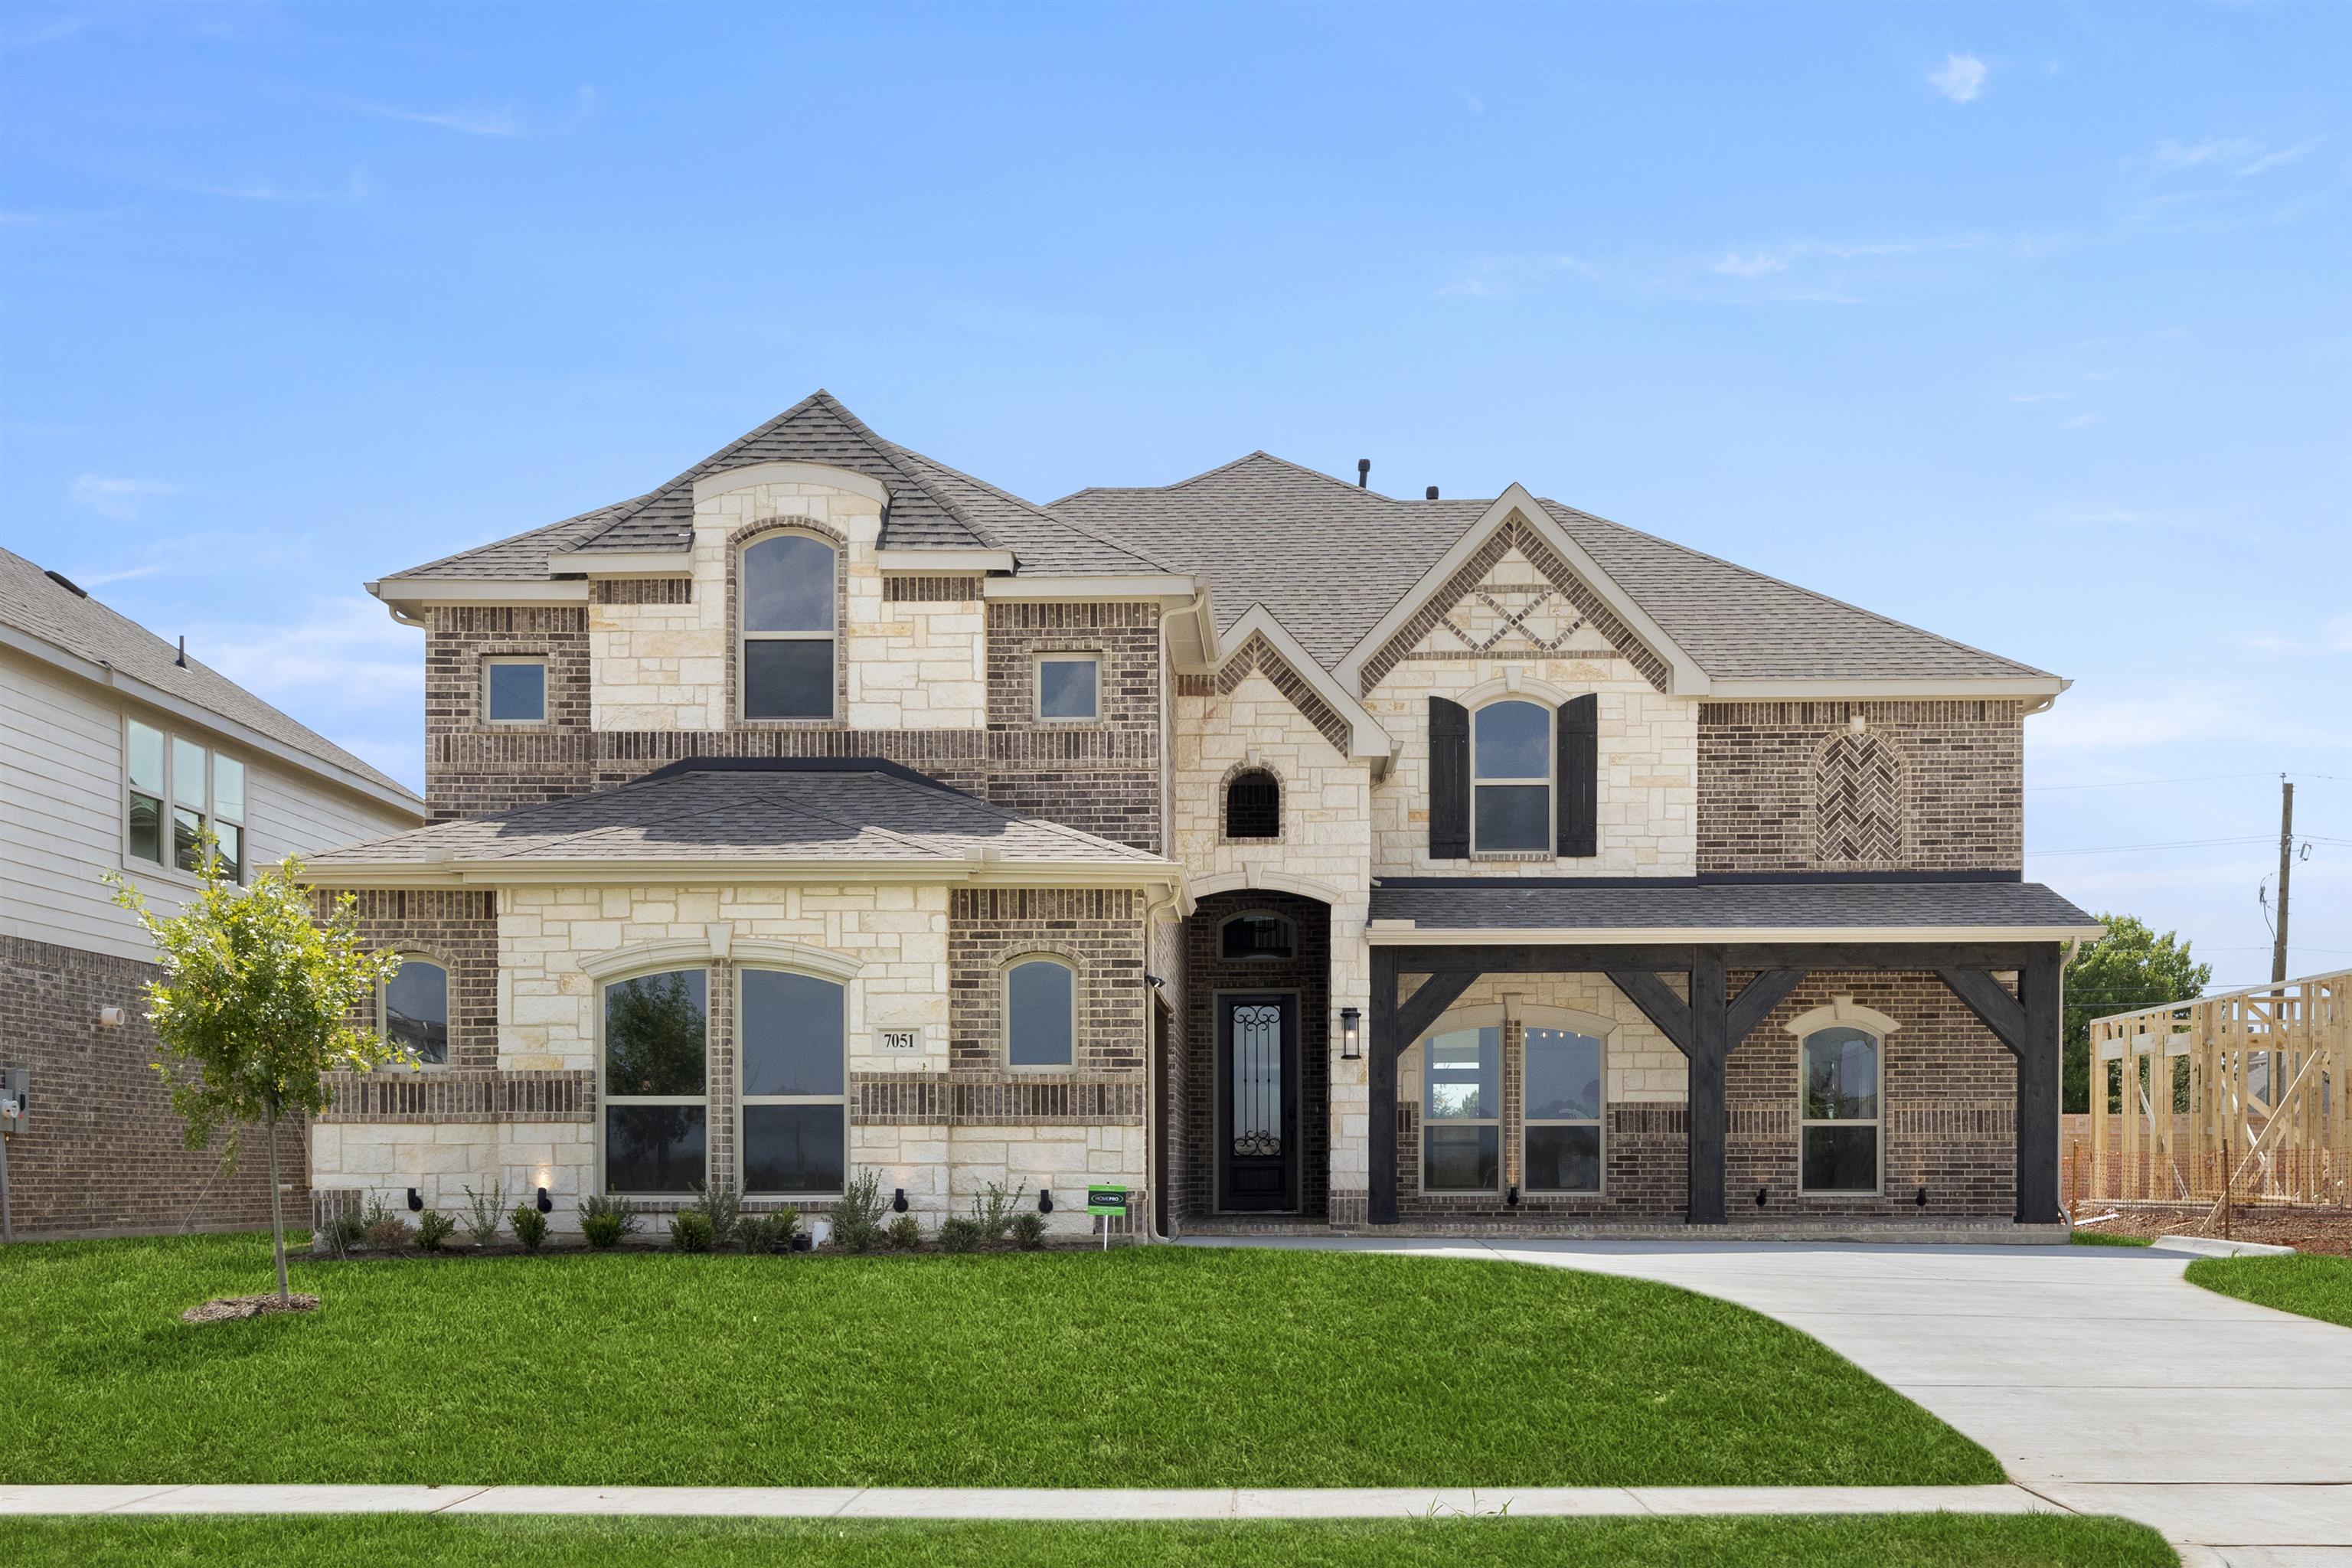 Why Every Dallas/Fort Worth New Home Build Needs a Phase